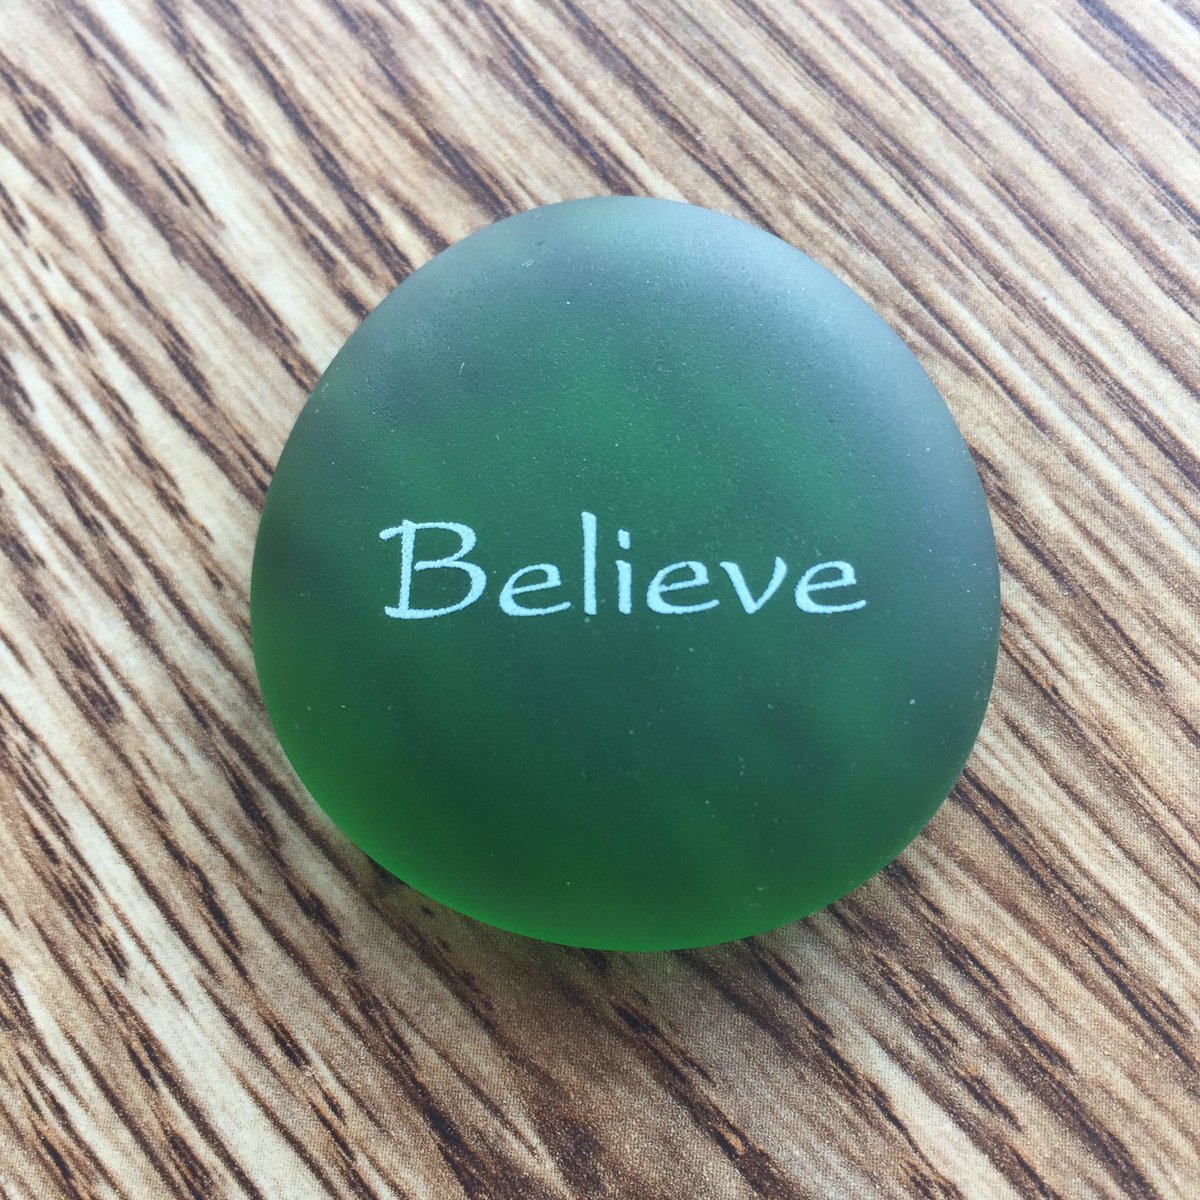 #Believe
I Believe that the world will be a better place after this pandemic
I Believe we will start to treat each other better
I Believe that we will all be stronger 
I Believe...

What do you believe? 

#inspiration #wordsofwisdom #inspirational #positivity #thinkingpositive